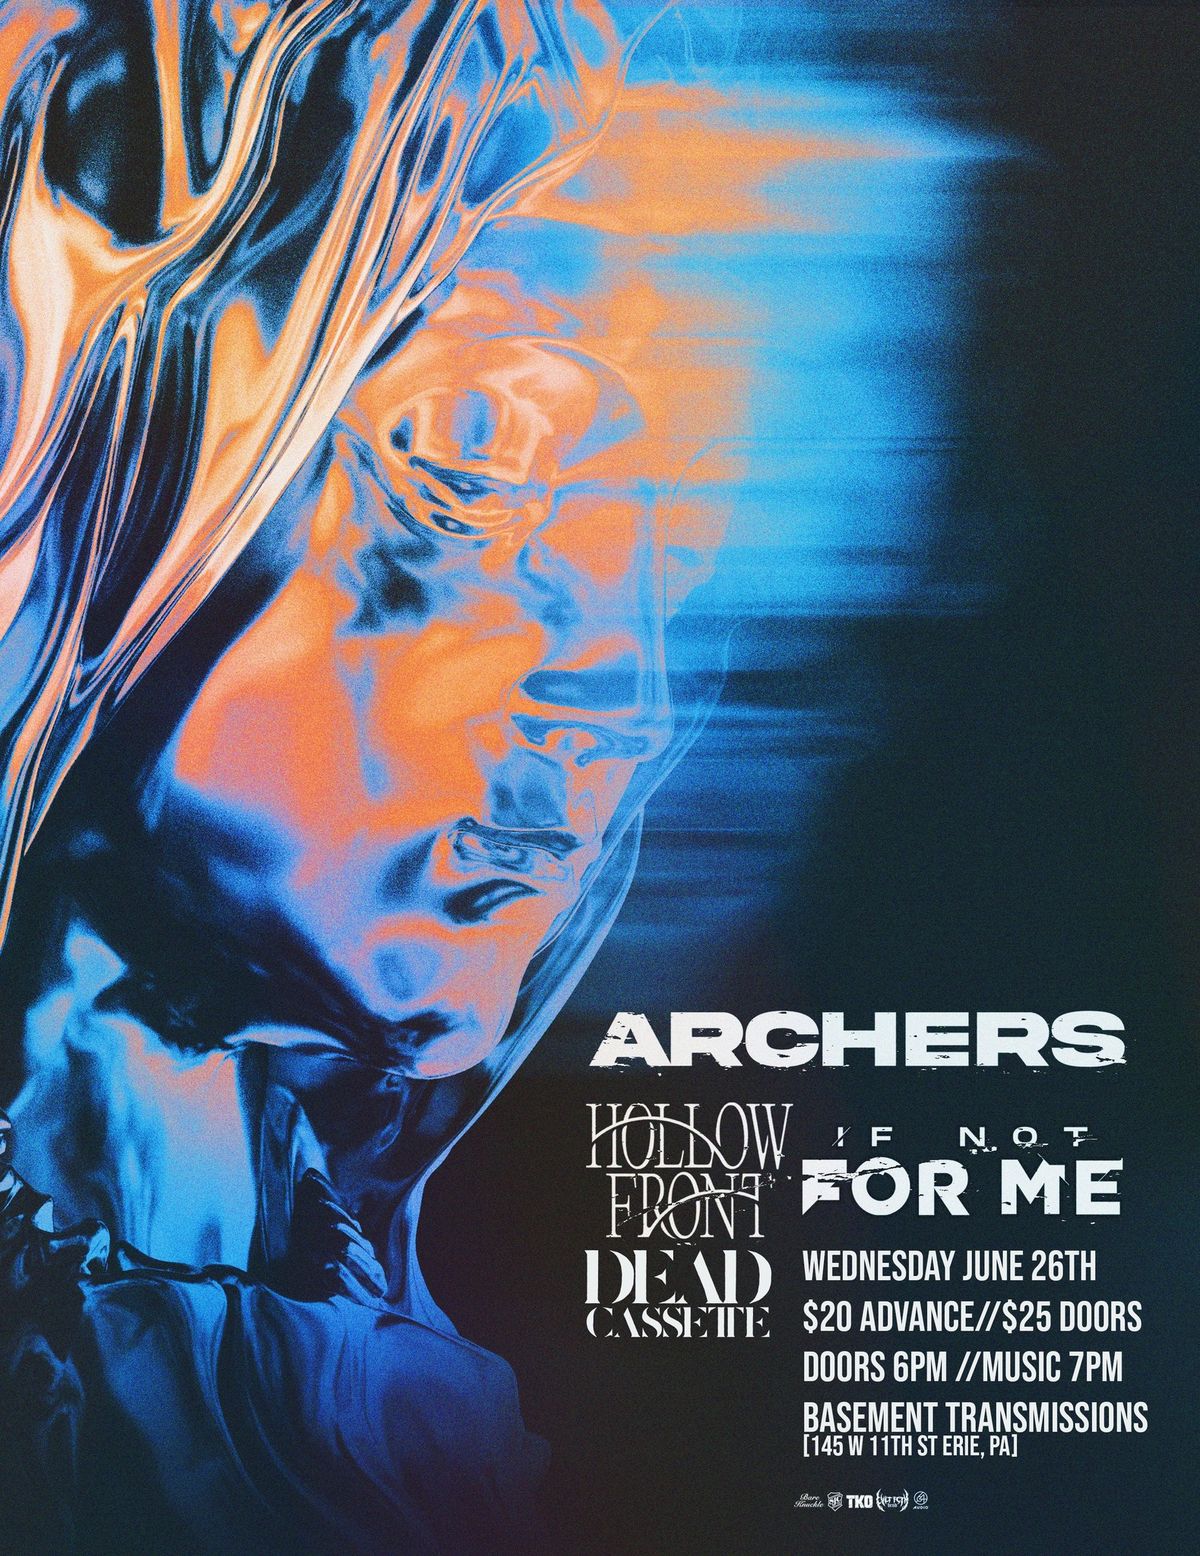 ARCHERS, Hollow Front, If Not For Me, & Dead Cassette At Basement Transmissions 